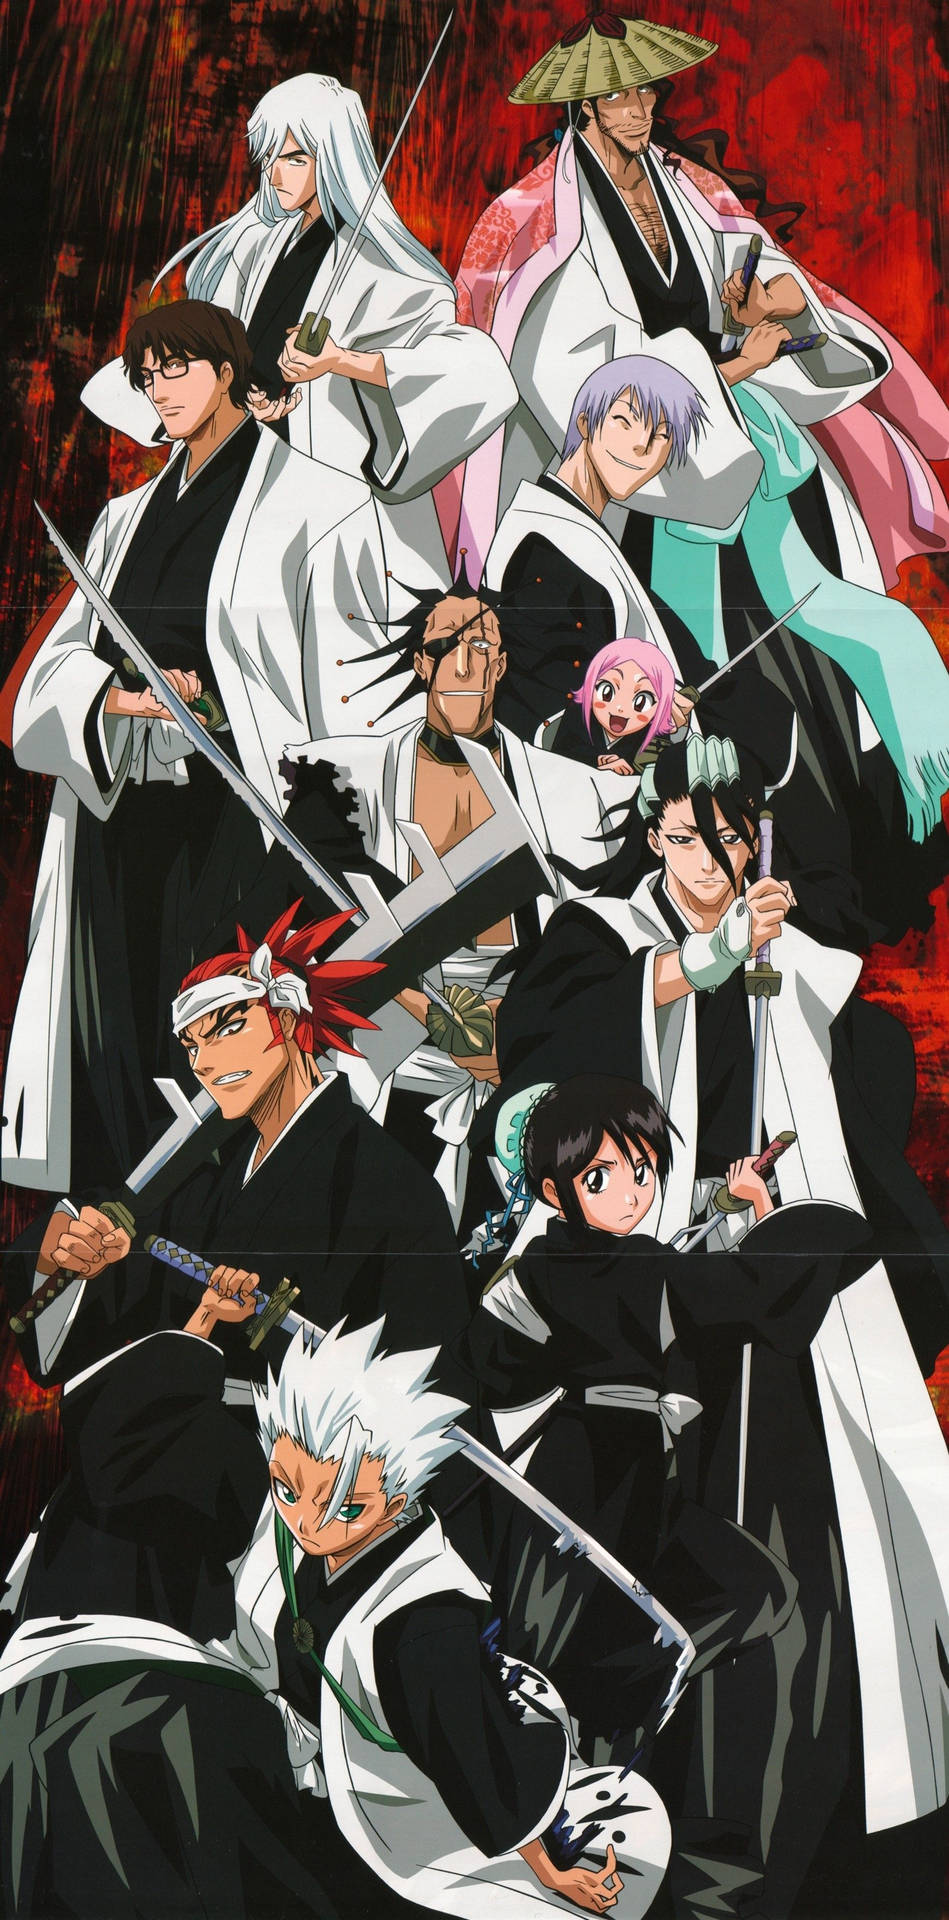 Bleach Wallpaper For Ipad  Hd anime wallpapers, Cool anime wallpapers,  Anime